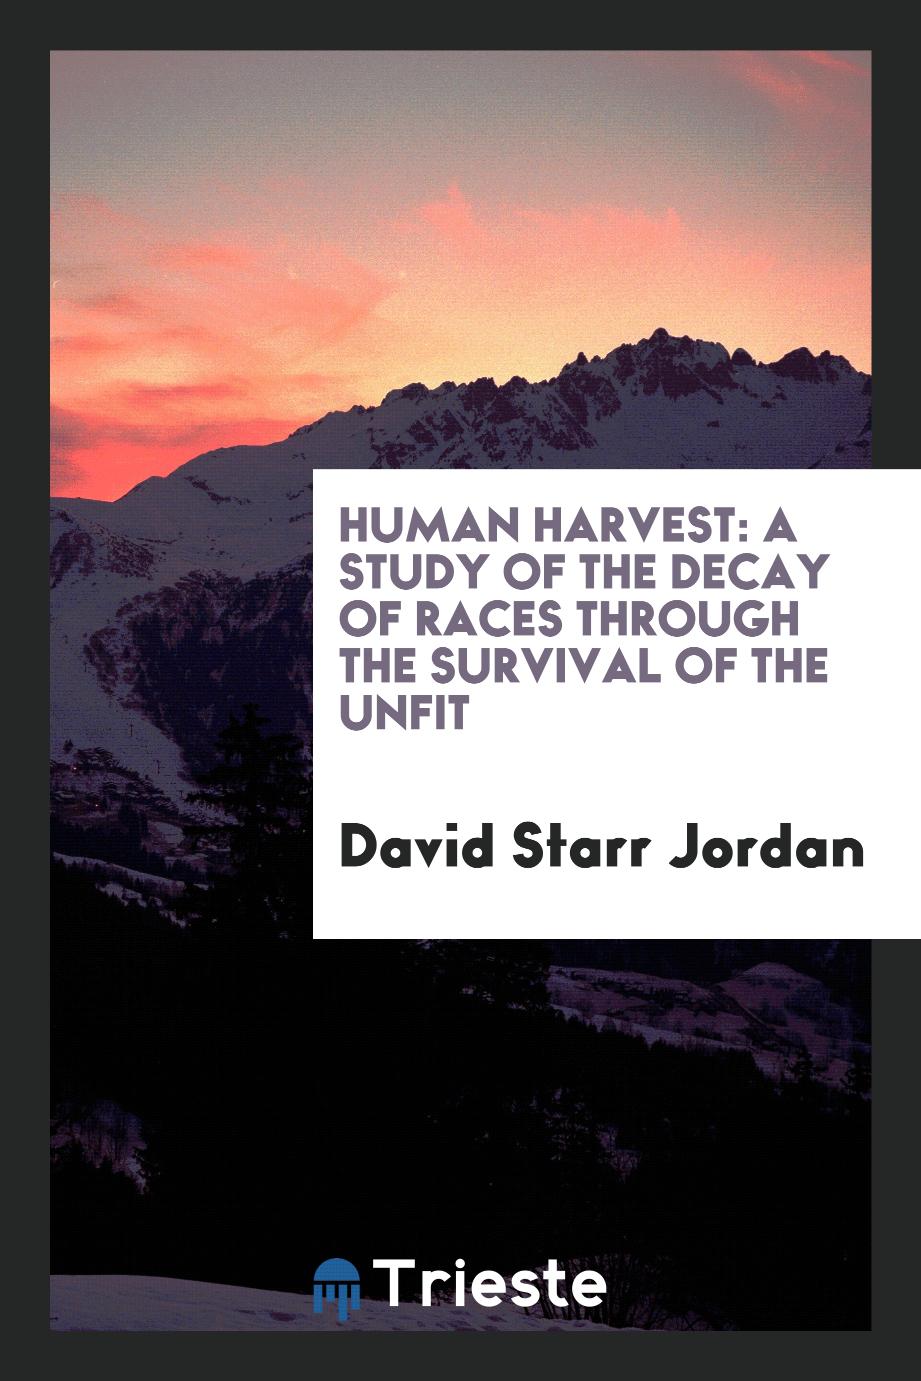 Human Harvest: A Study of the Decay of Races Through the Survival of the Unfit